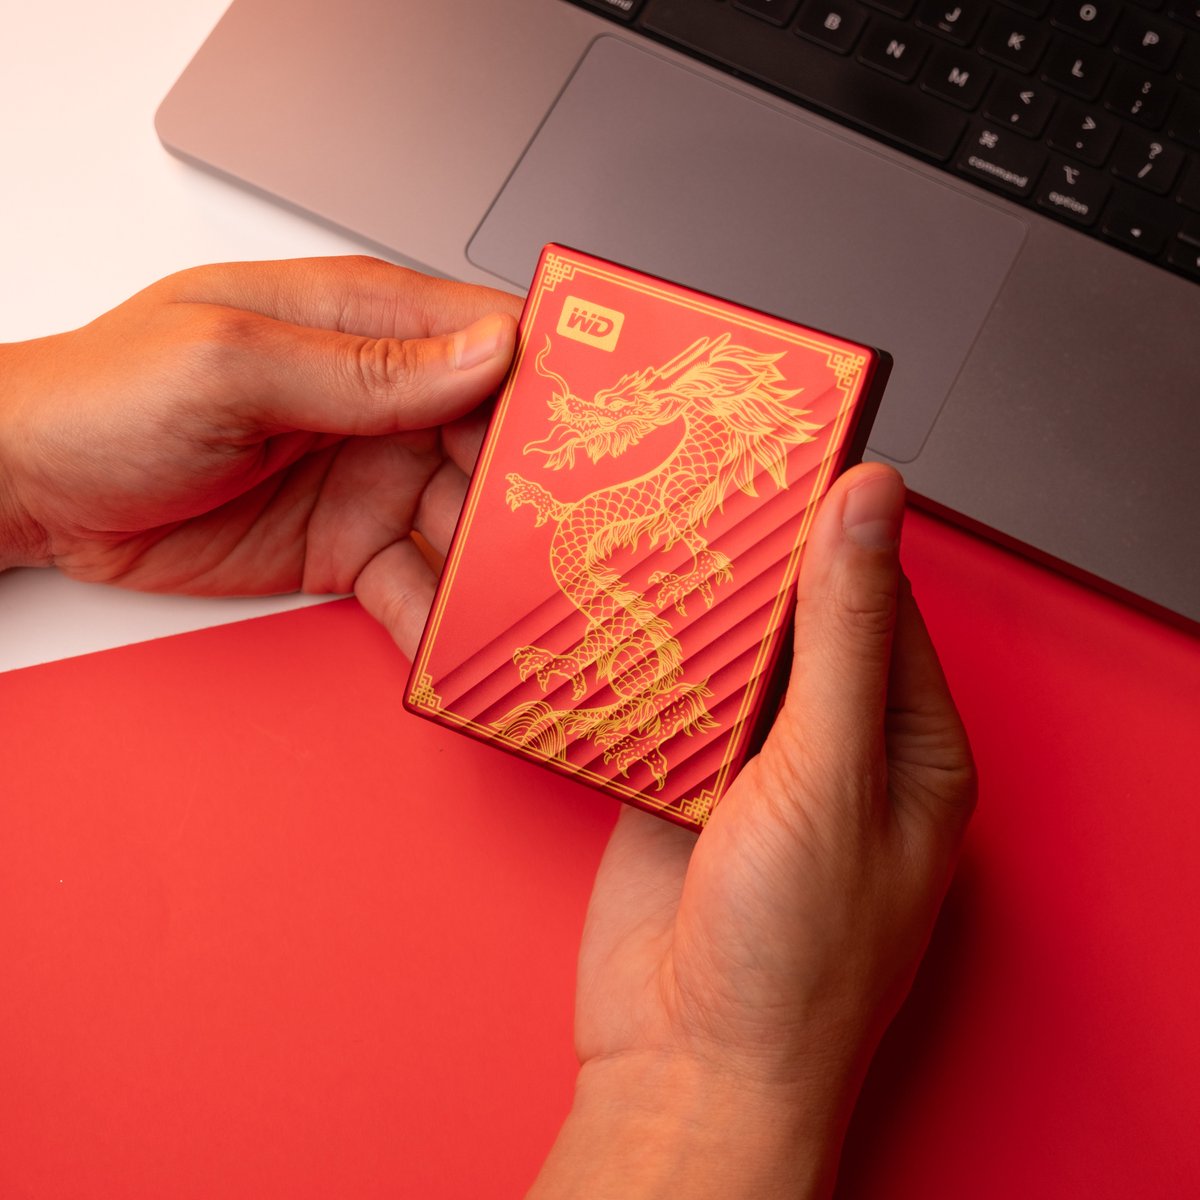 Our Limited Edition MyPassport Dragon is BACK in stock! Hurry - limited quantities remain: bit.ly/44GeMBY